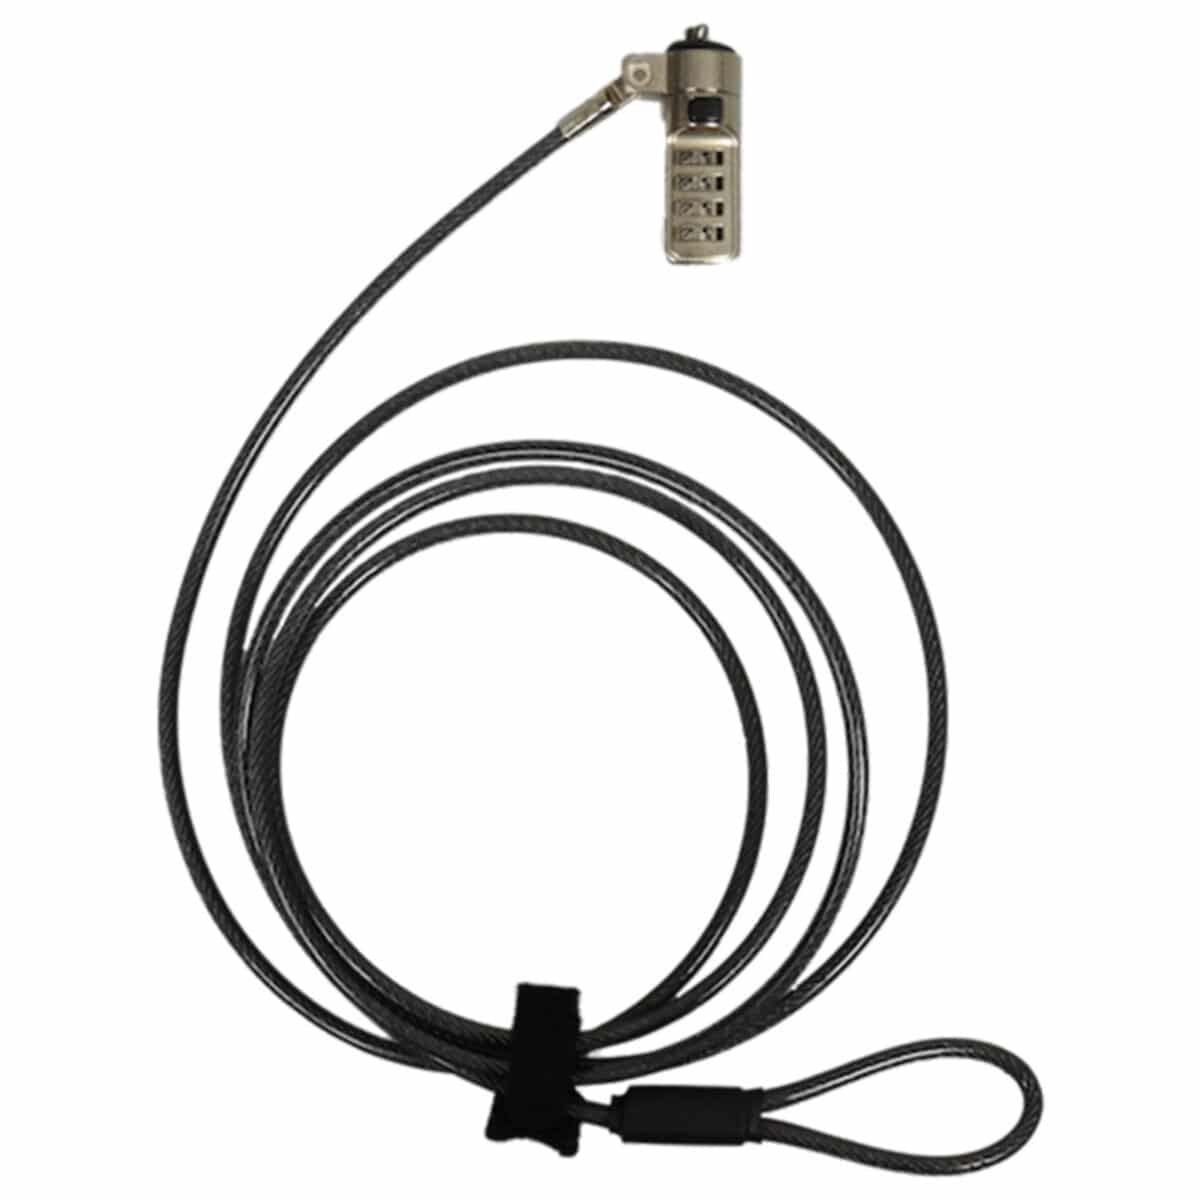 PORT CABLES PORT SECURITY CABLE COMBINATION - NOBLE WEDGE SLOT 1 YEAR CARRY IN WARRANTY